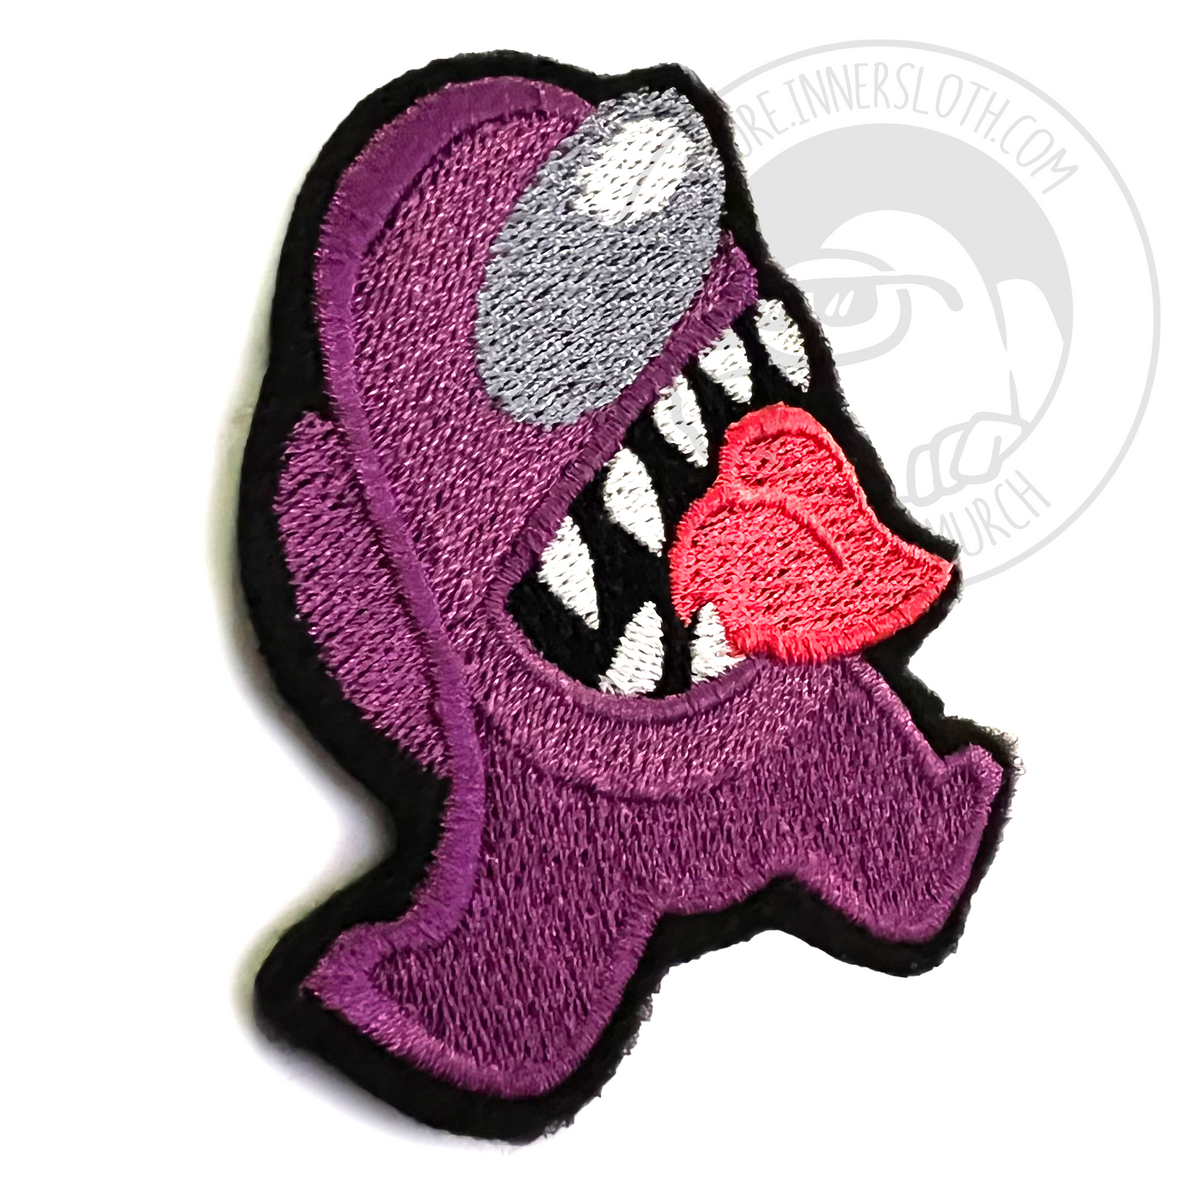 A ¾ view of the Embroidered Impostor Patch.